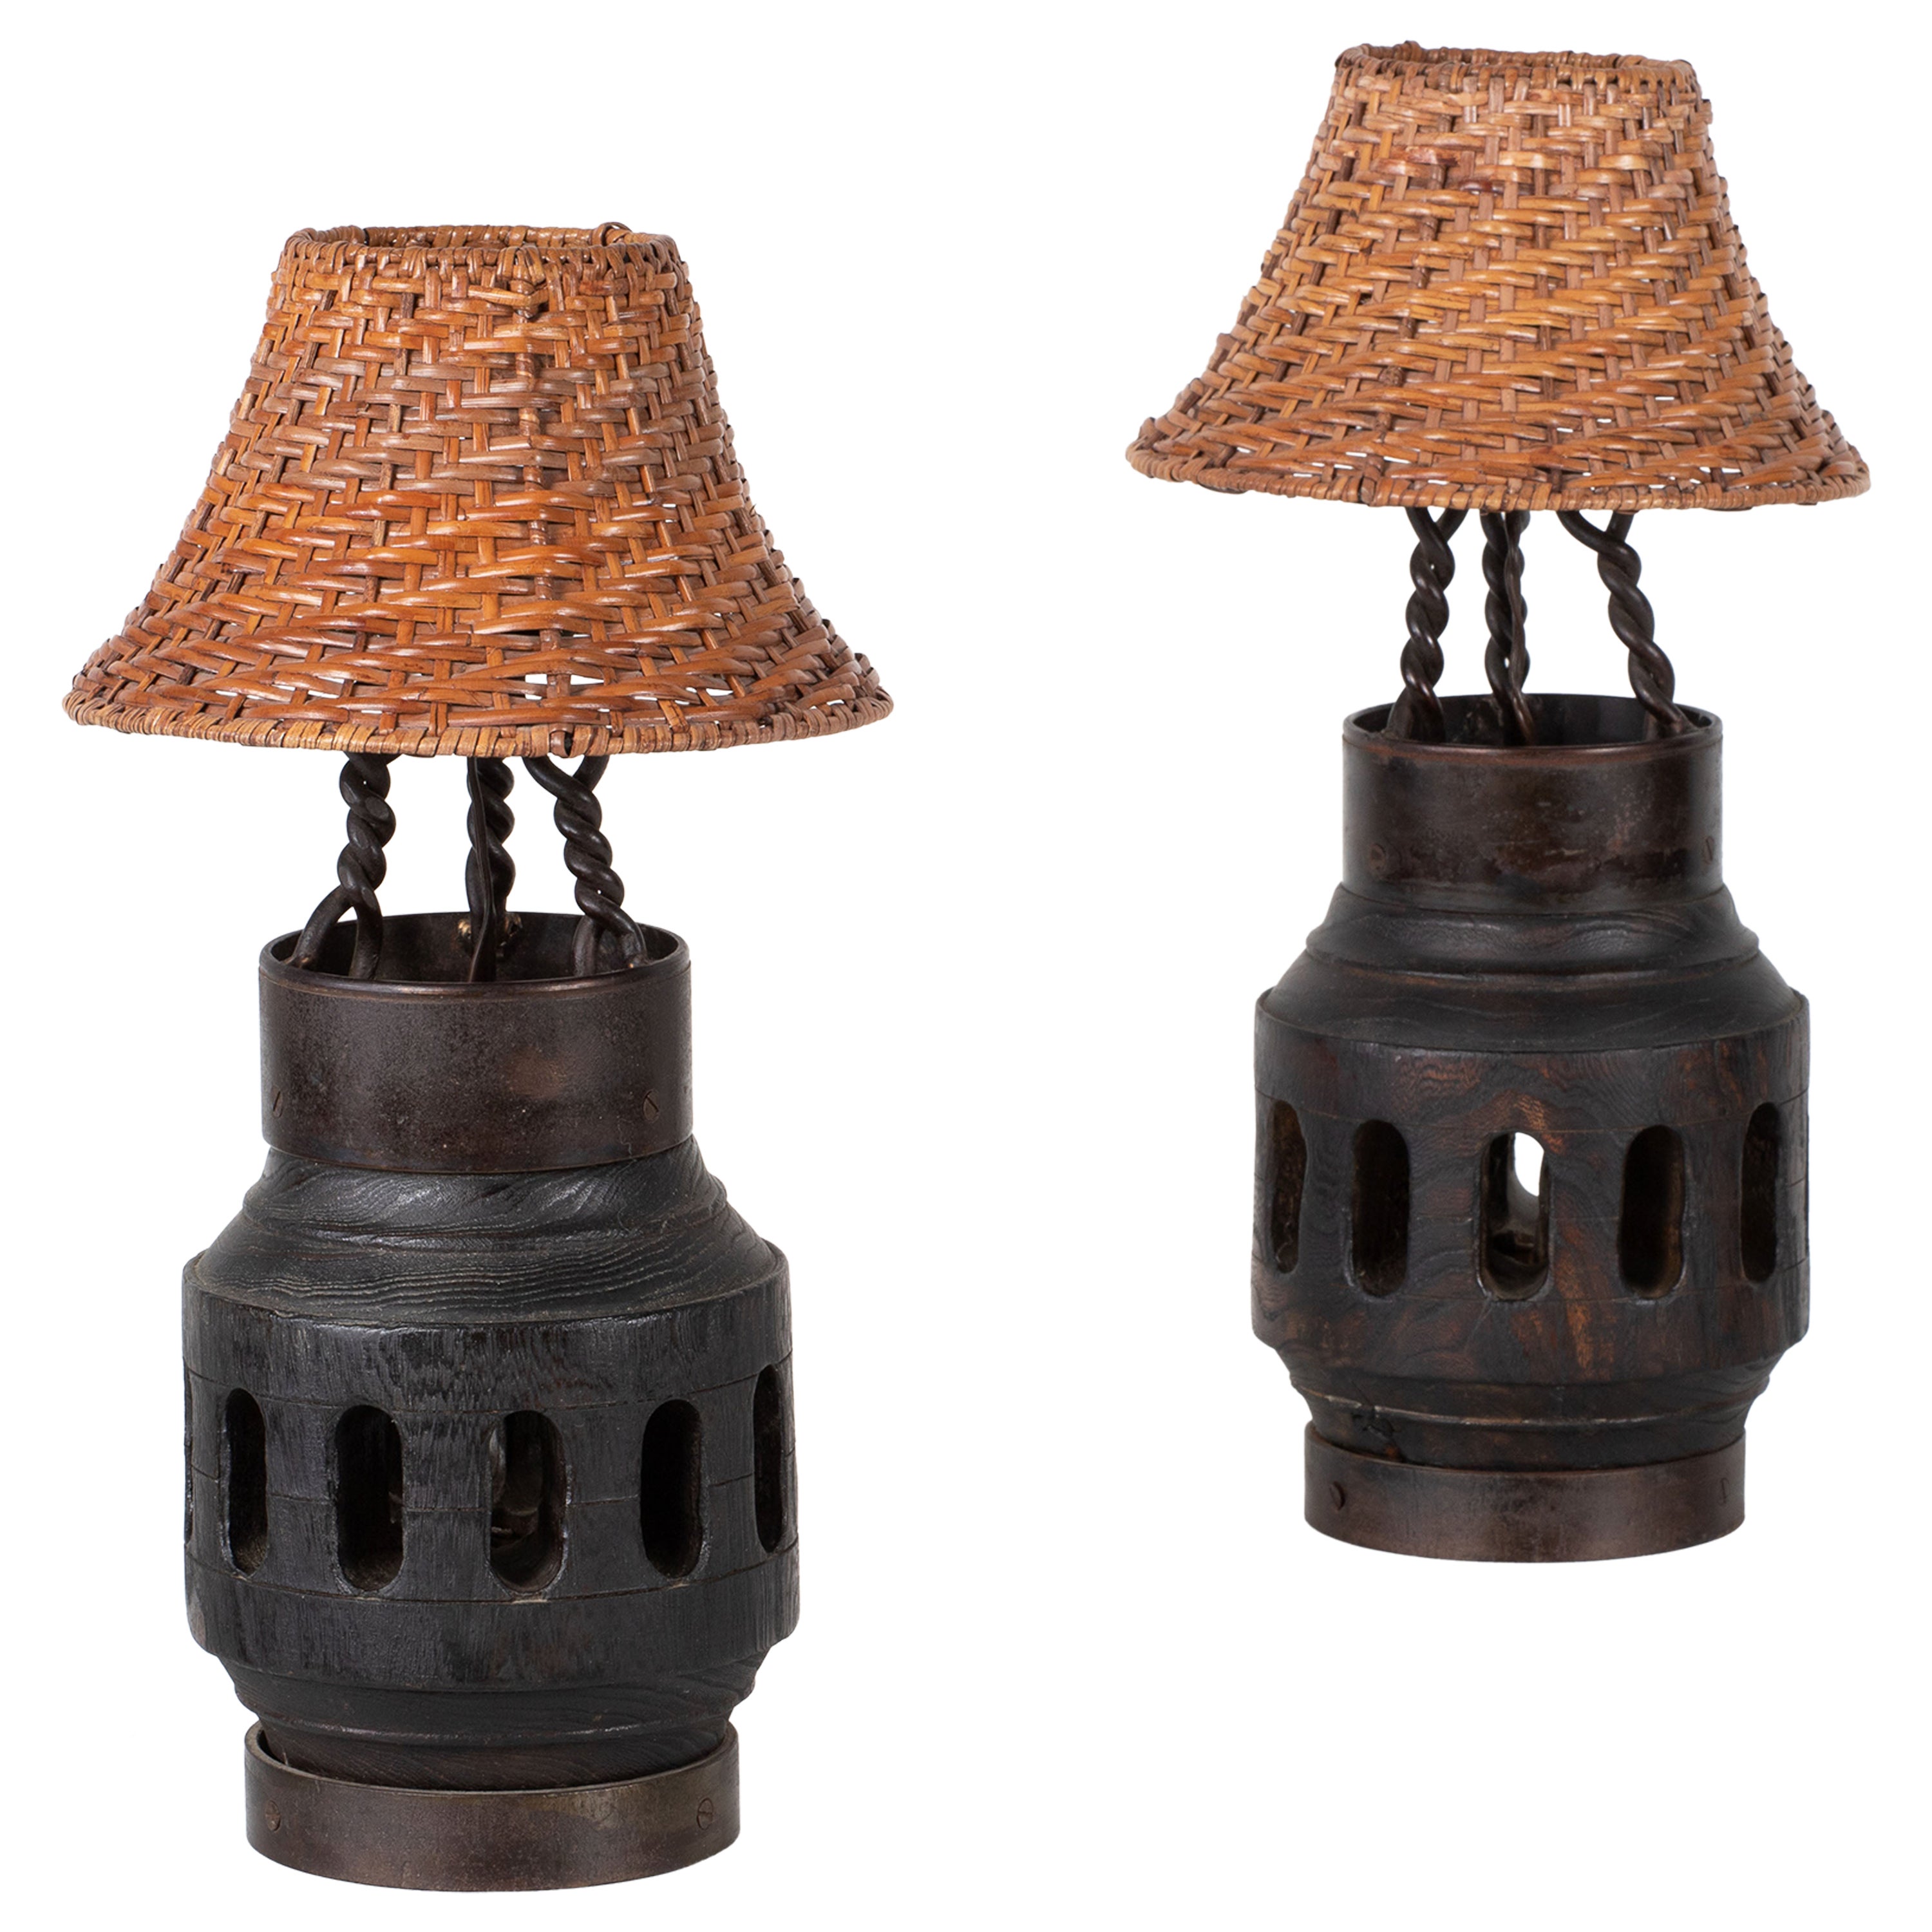 XIX-Century Table Lamp from an old cart wheel hub, France, a Pair